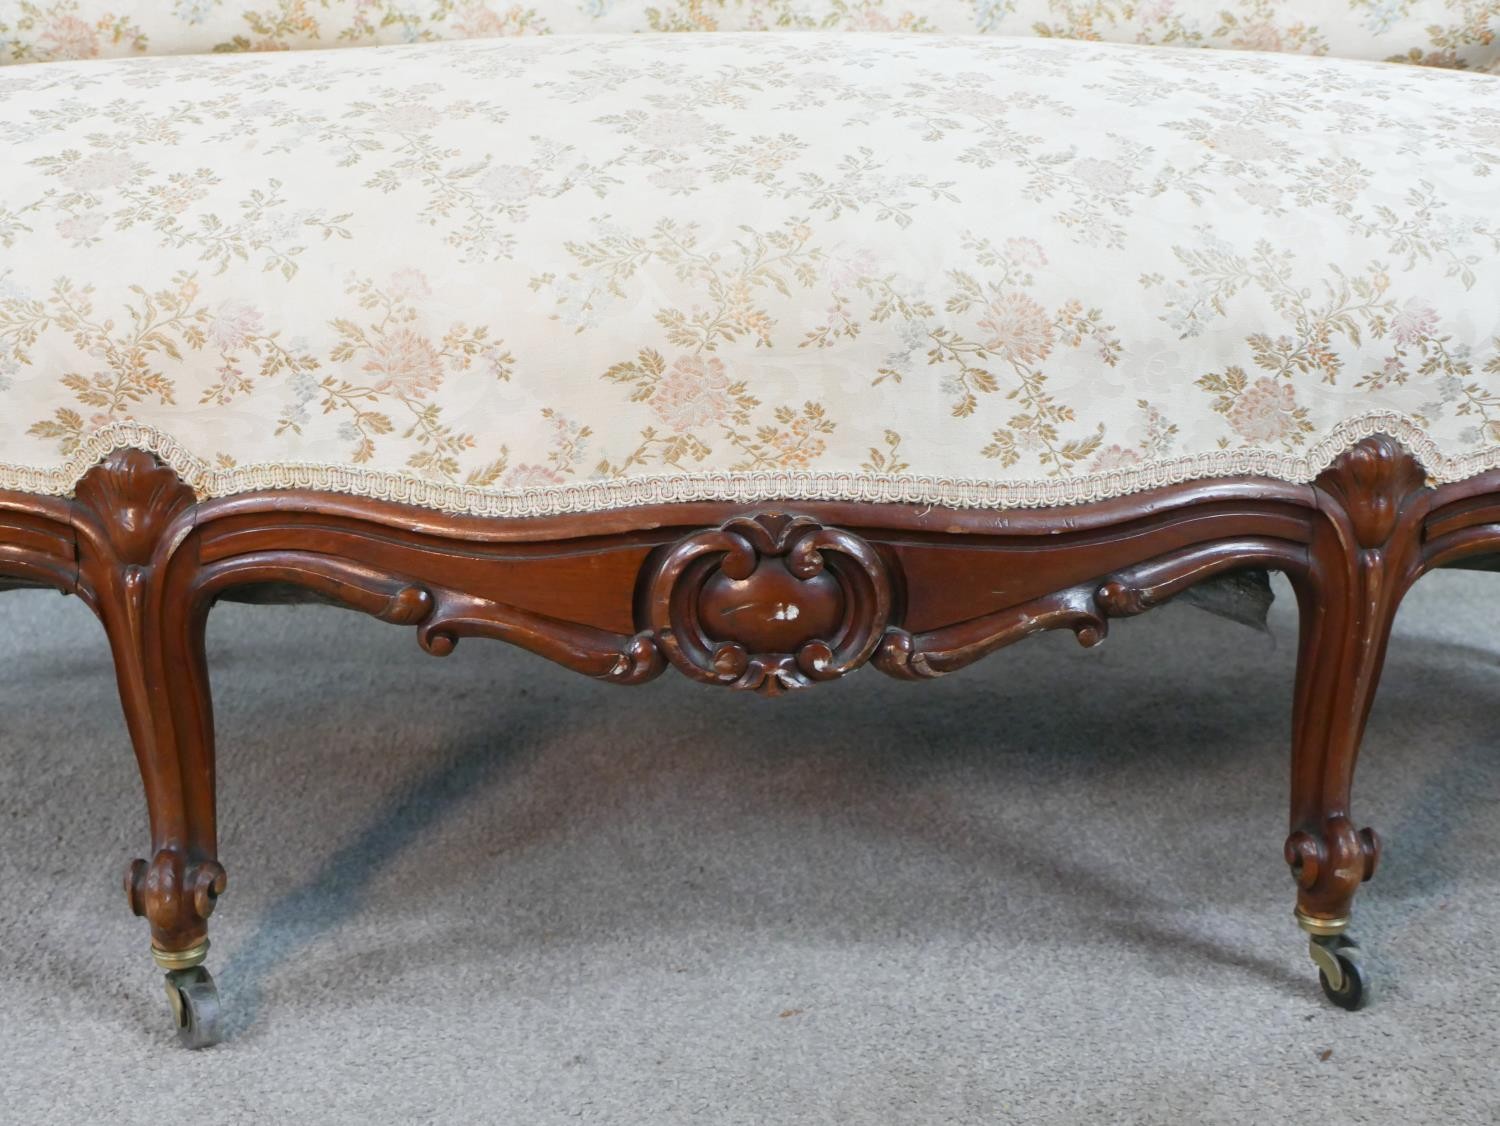 A 20th century French carved mahogany framed open arm settee, upholstered in cream fabric, raised on - Image 6 of 7